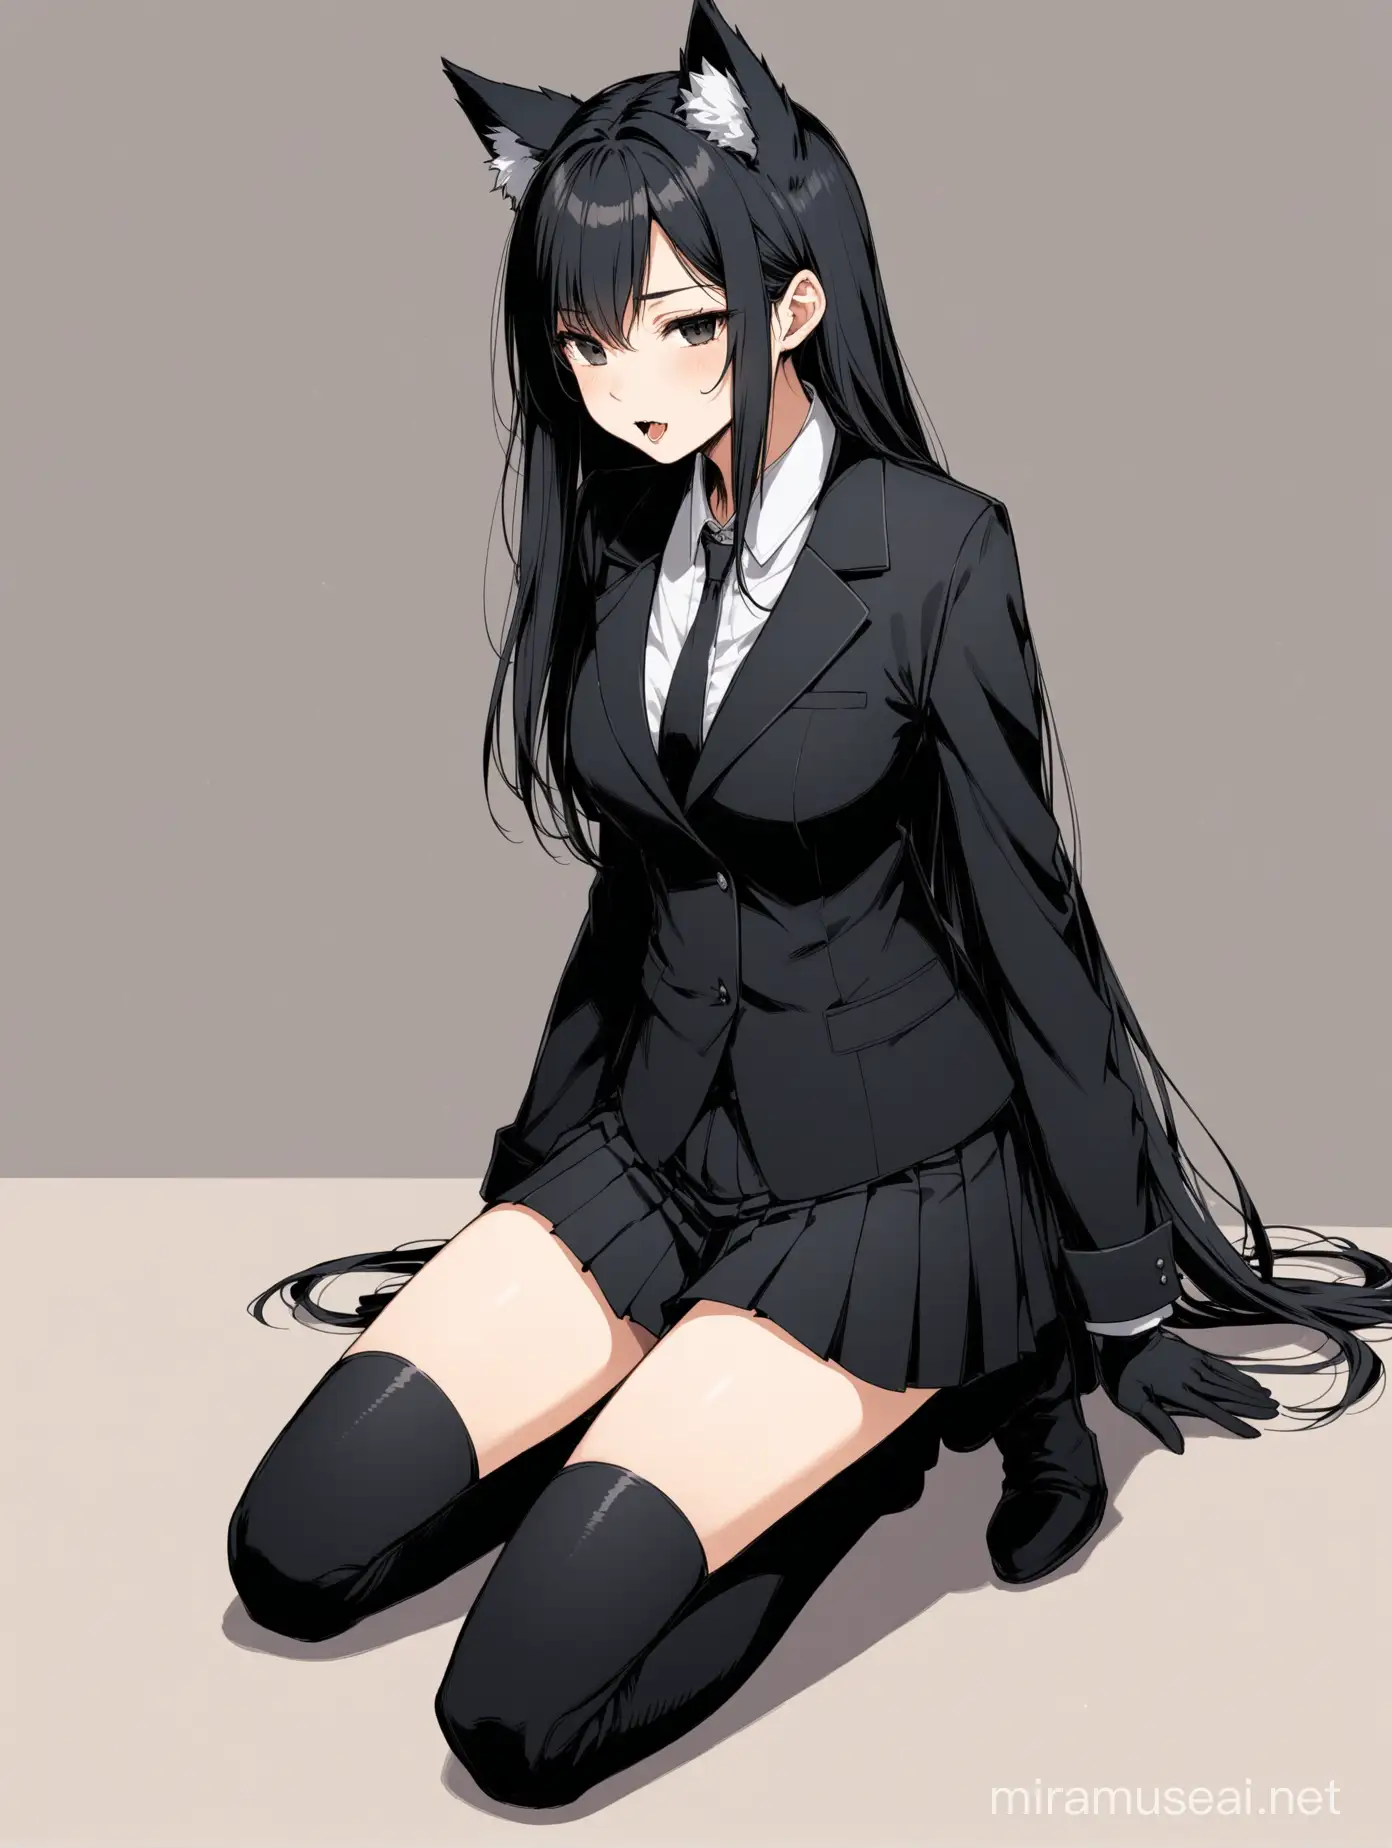 full body view, side profile, tall girl, wolf girl, wolf ears, white ear tufts, black eyes, right eye winking closed, long hair, black hair, short black suit coat, short black pleated skirt, black gloves, long sleeves, black tall thigh boots, neutral expression, fully kneeling down on floor, upright, legs together, head tilted up, mouth open